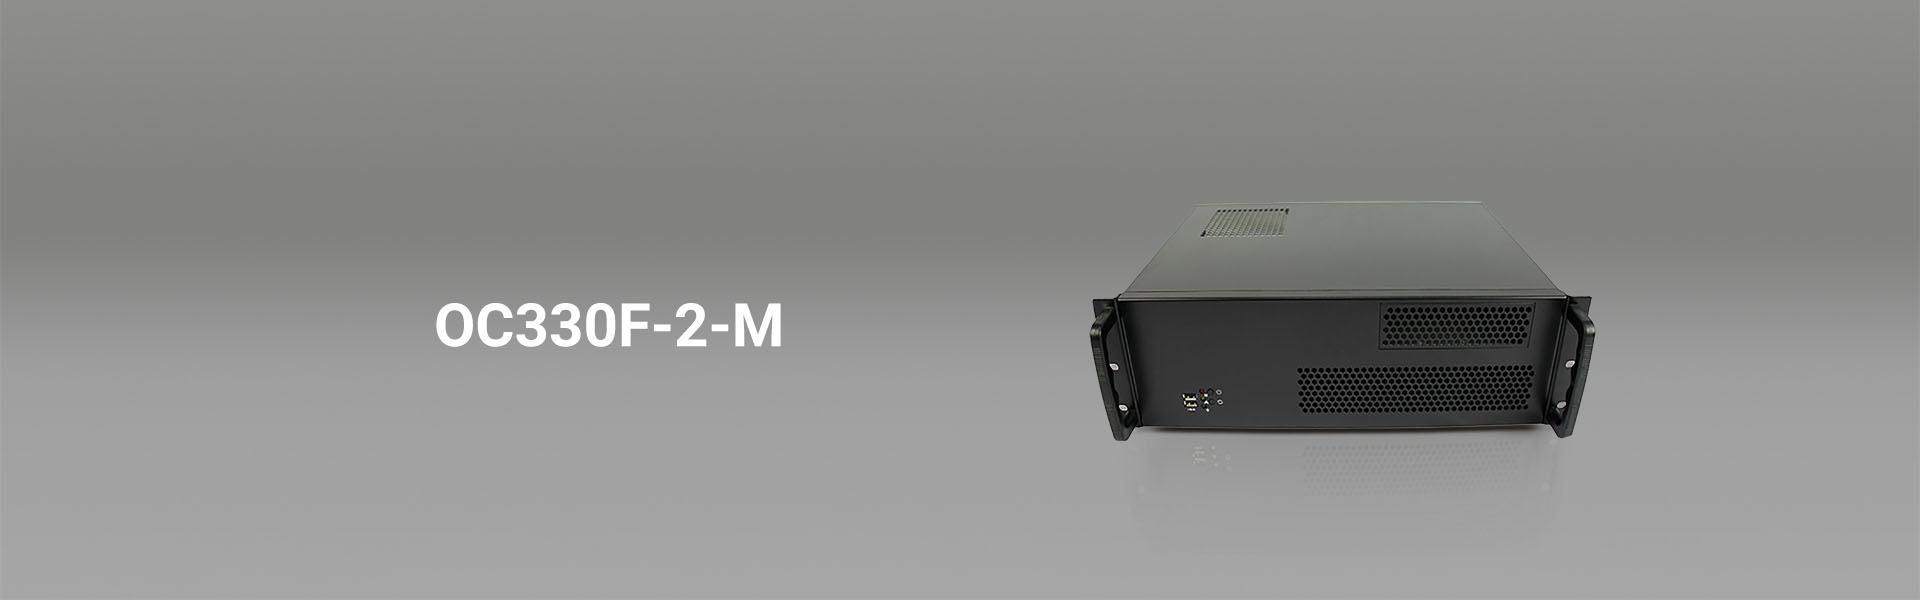 rackmount chassis-OC330F-2-M onechassis-banner